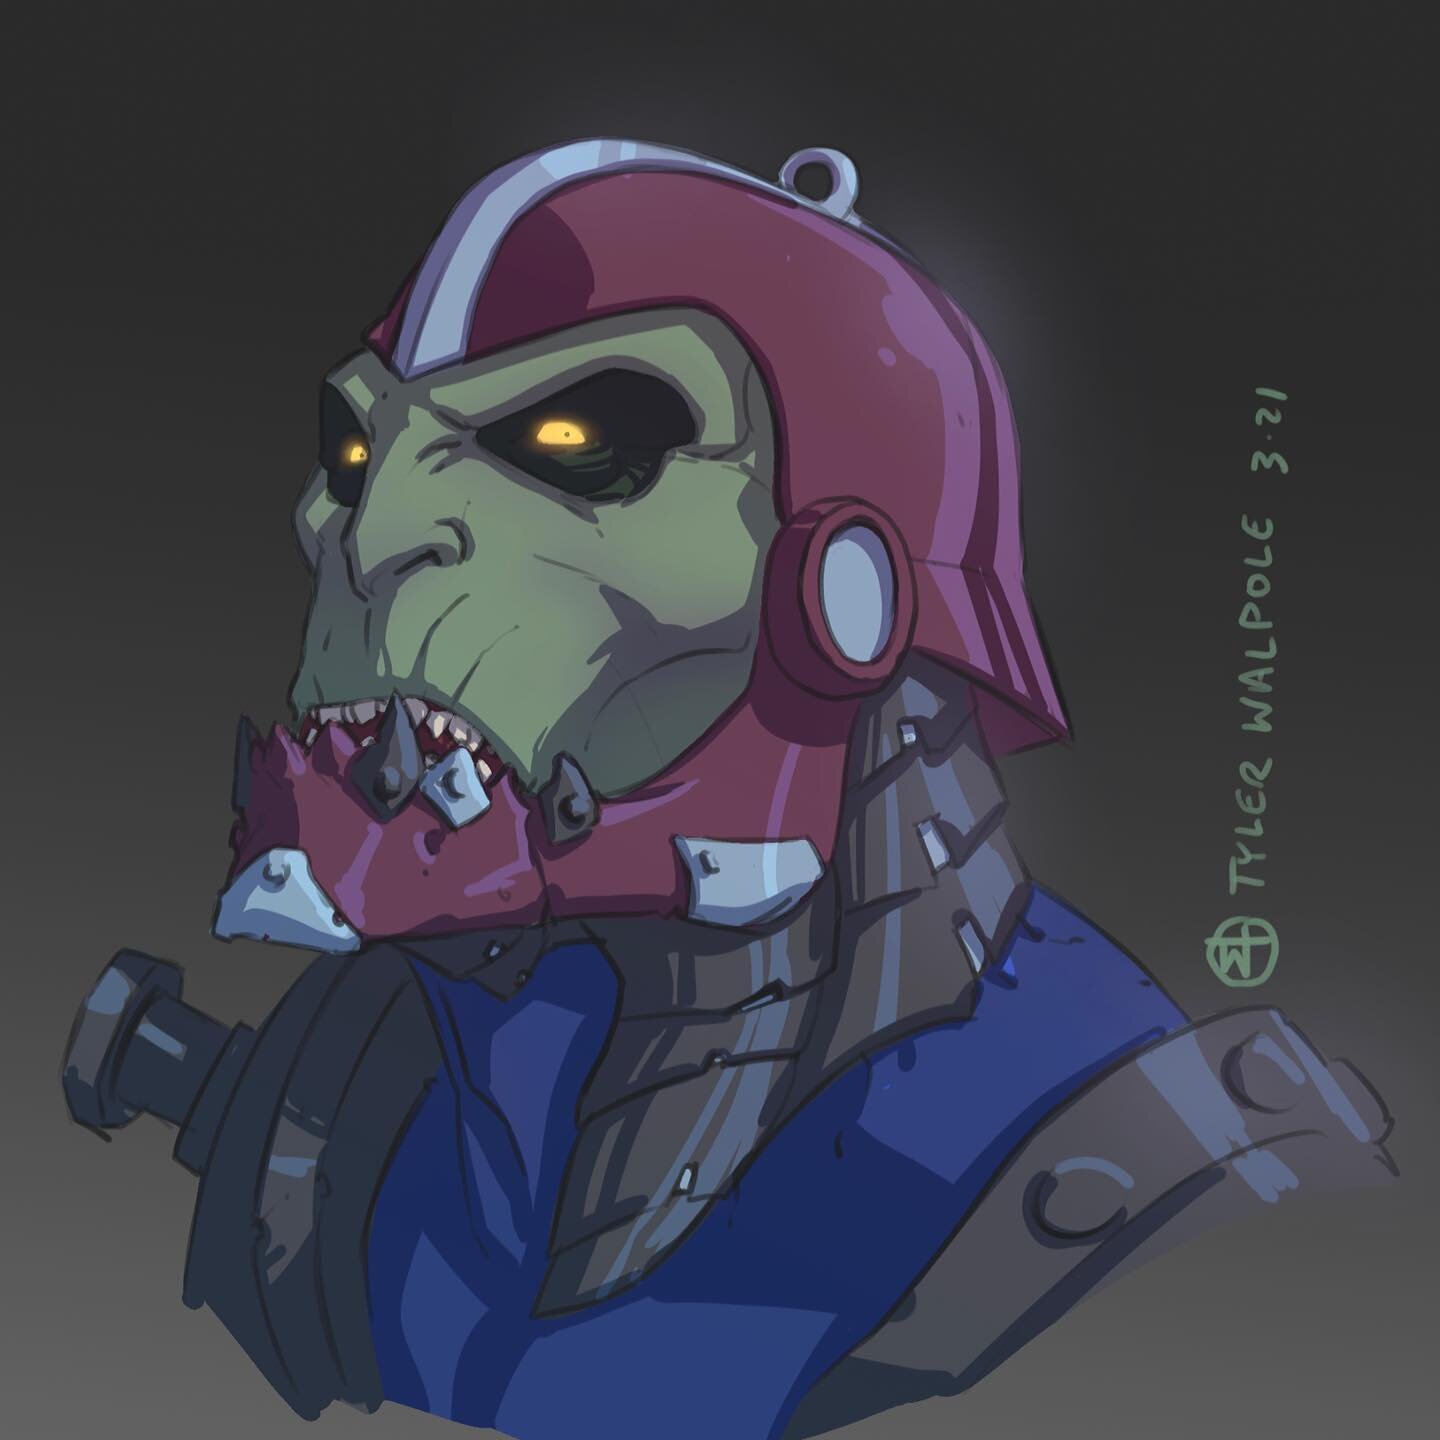 Updated this handsome devil to have the correct colors. #motu #heman #mastersoftheuniverse #trapjaw